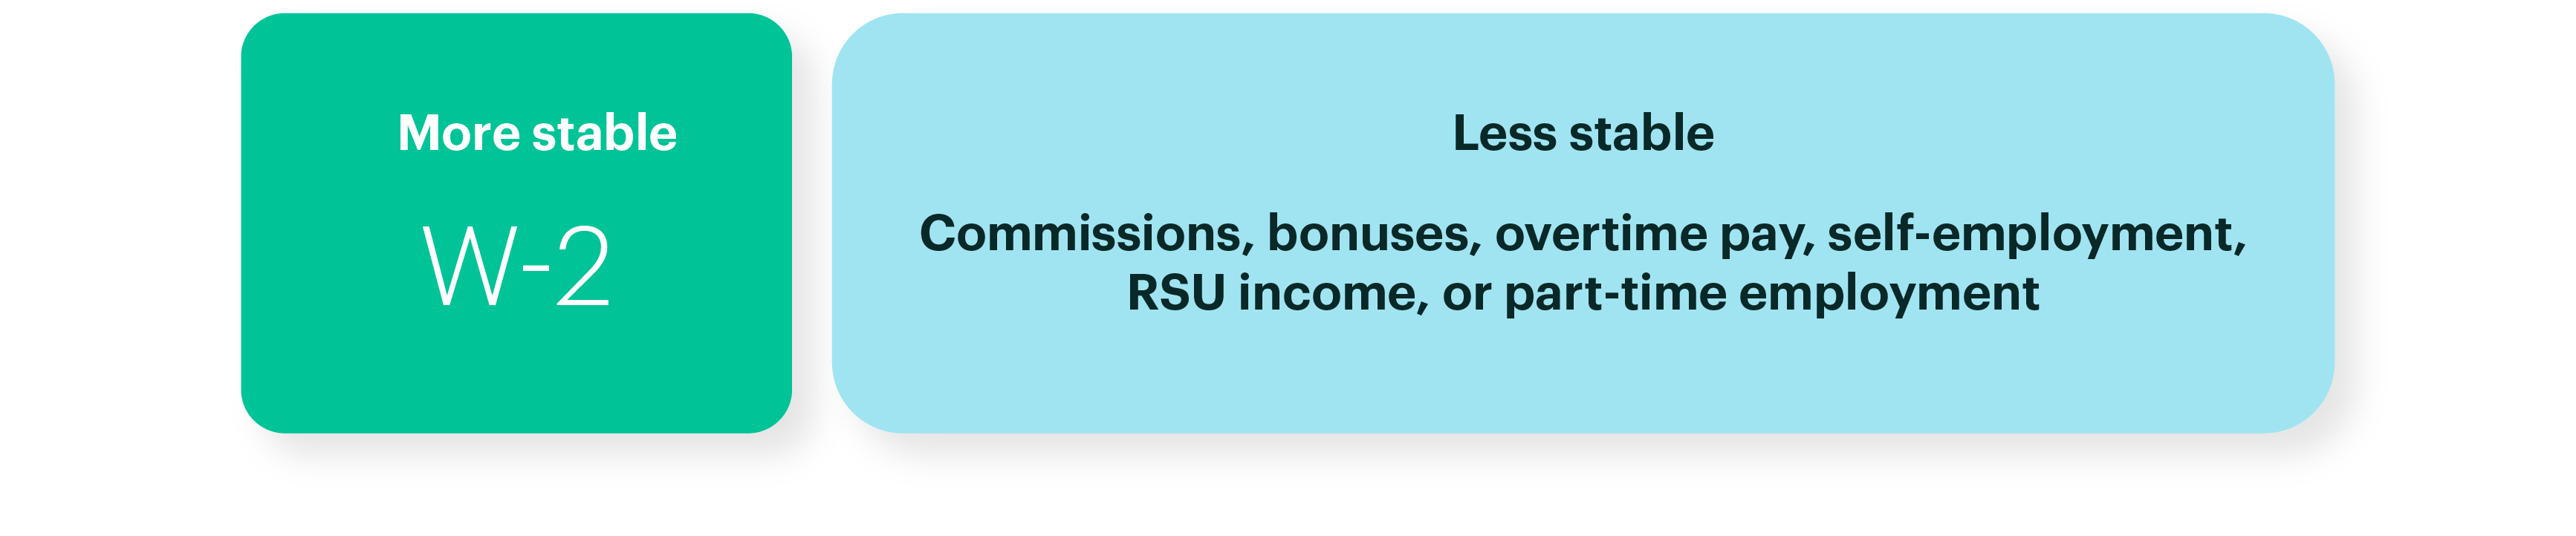  Diagram: Two Types of Pay Structures: More Stable W2 or Less Stable Commissions, Bonuses, Overtime, Self-Employment, RSU Income, or Part-Time Employment